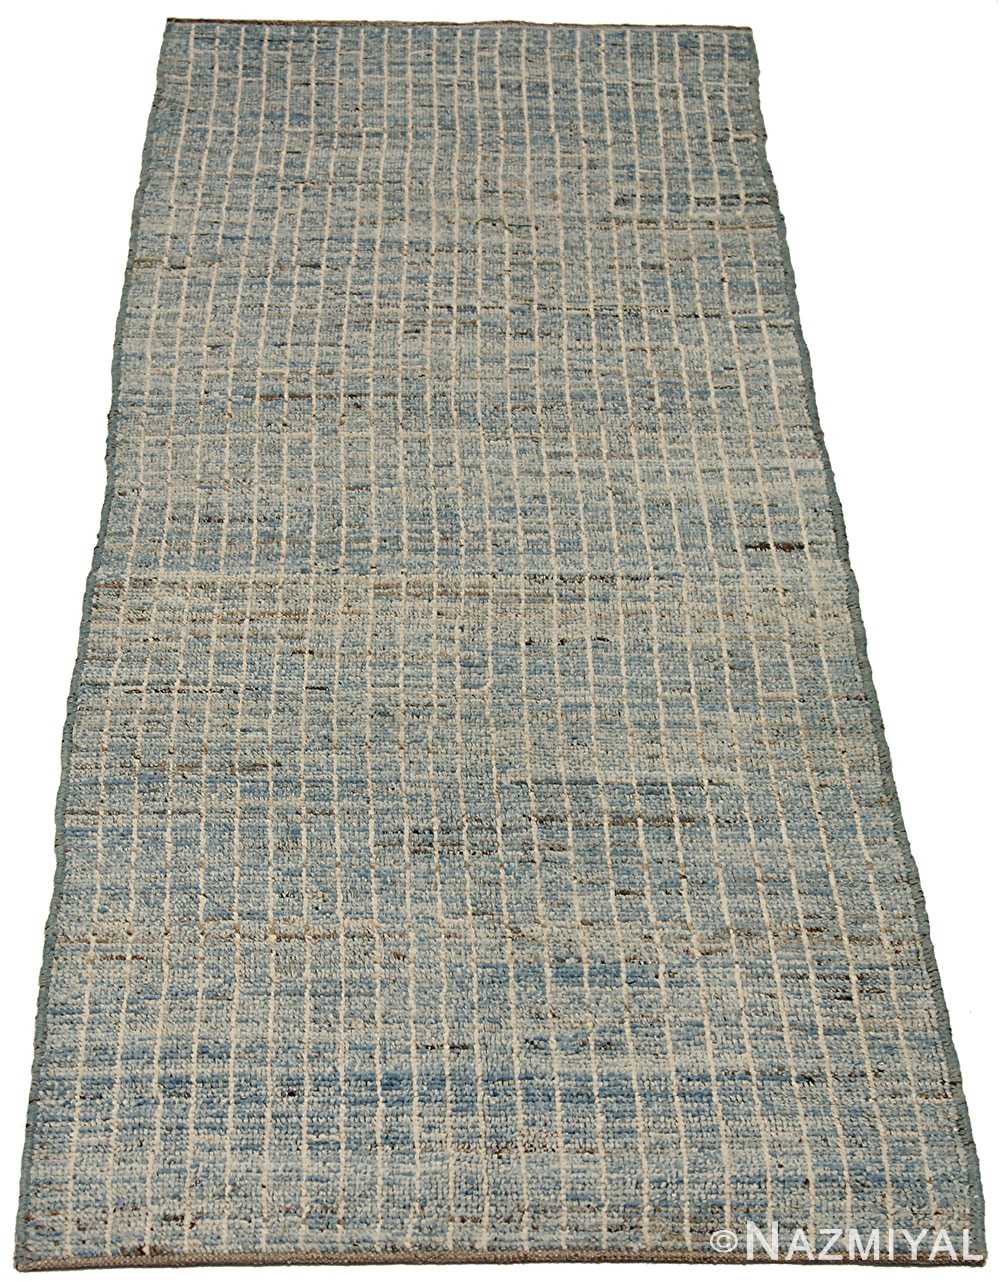 SULIS MOROCCAN IVORY BLUE GREY MODERN RUG RUNNER 80x300cm **FREE DELIVERY** M 